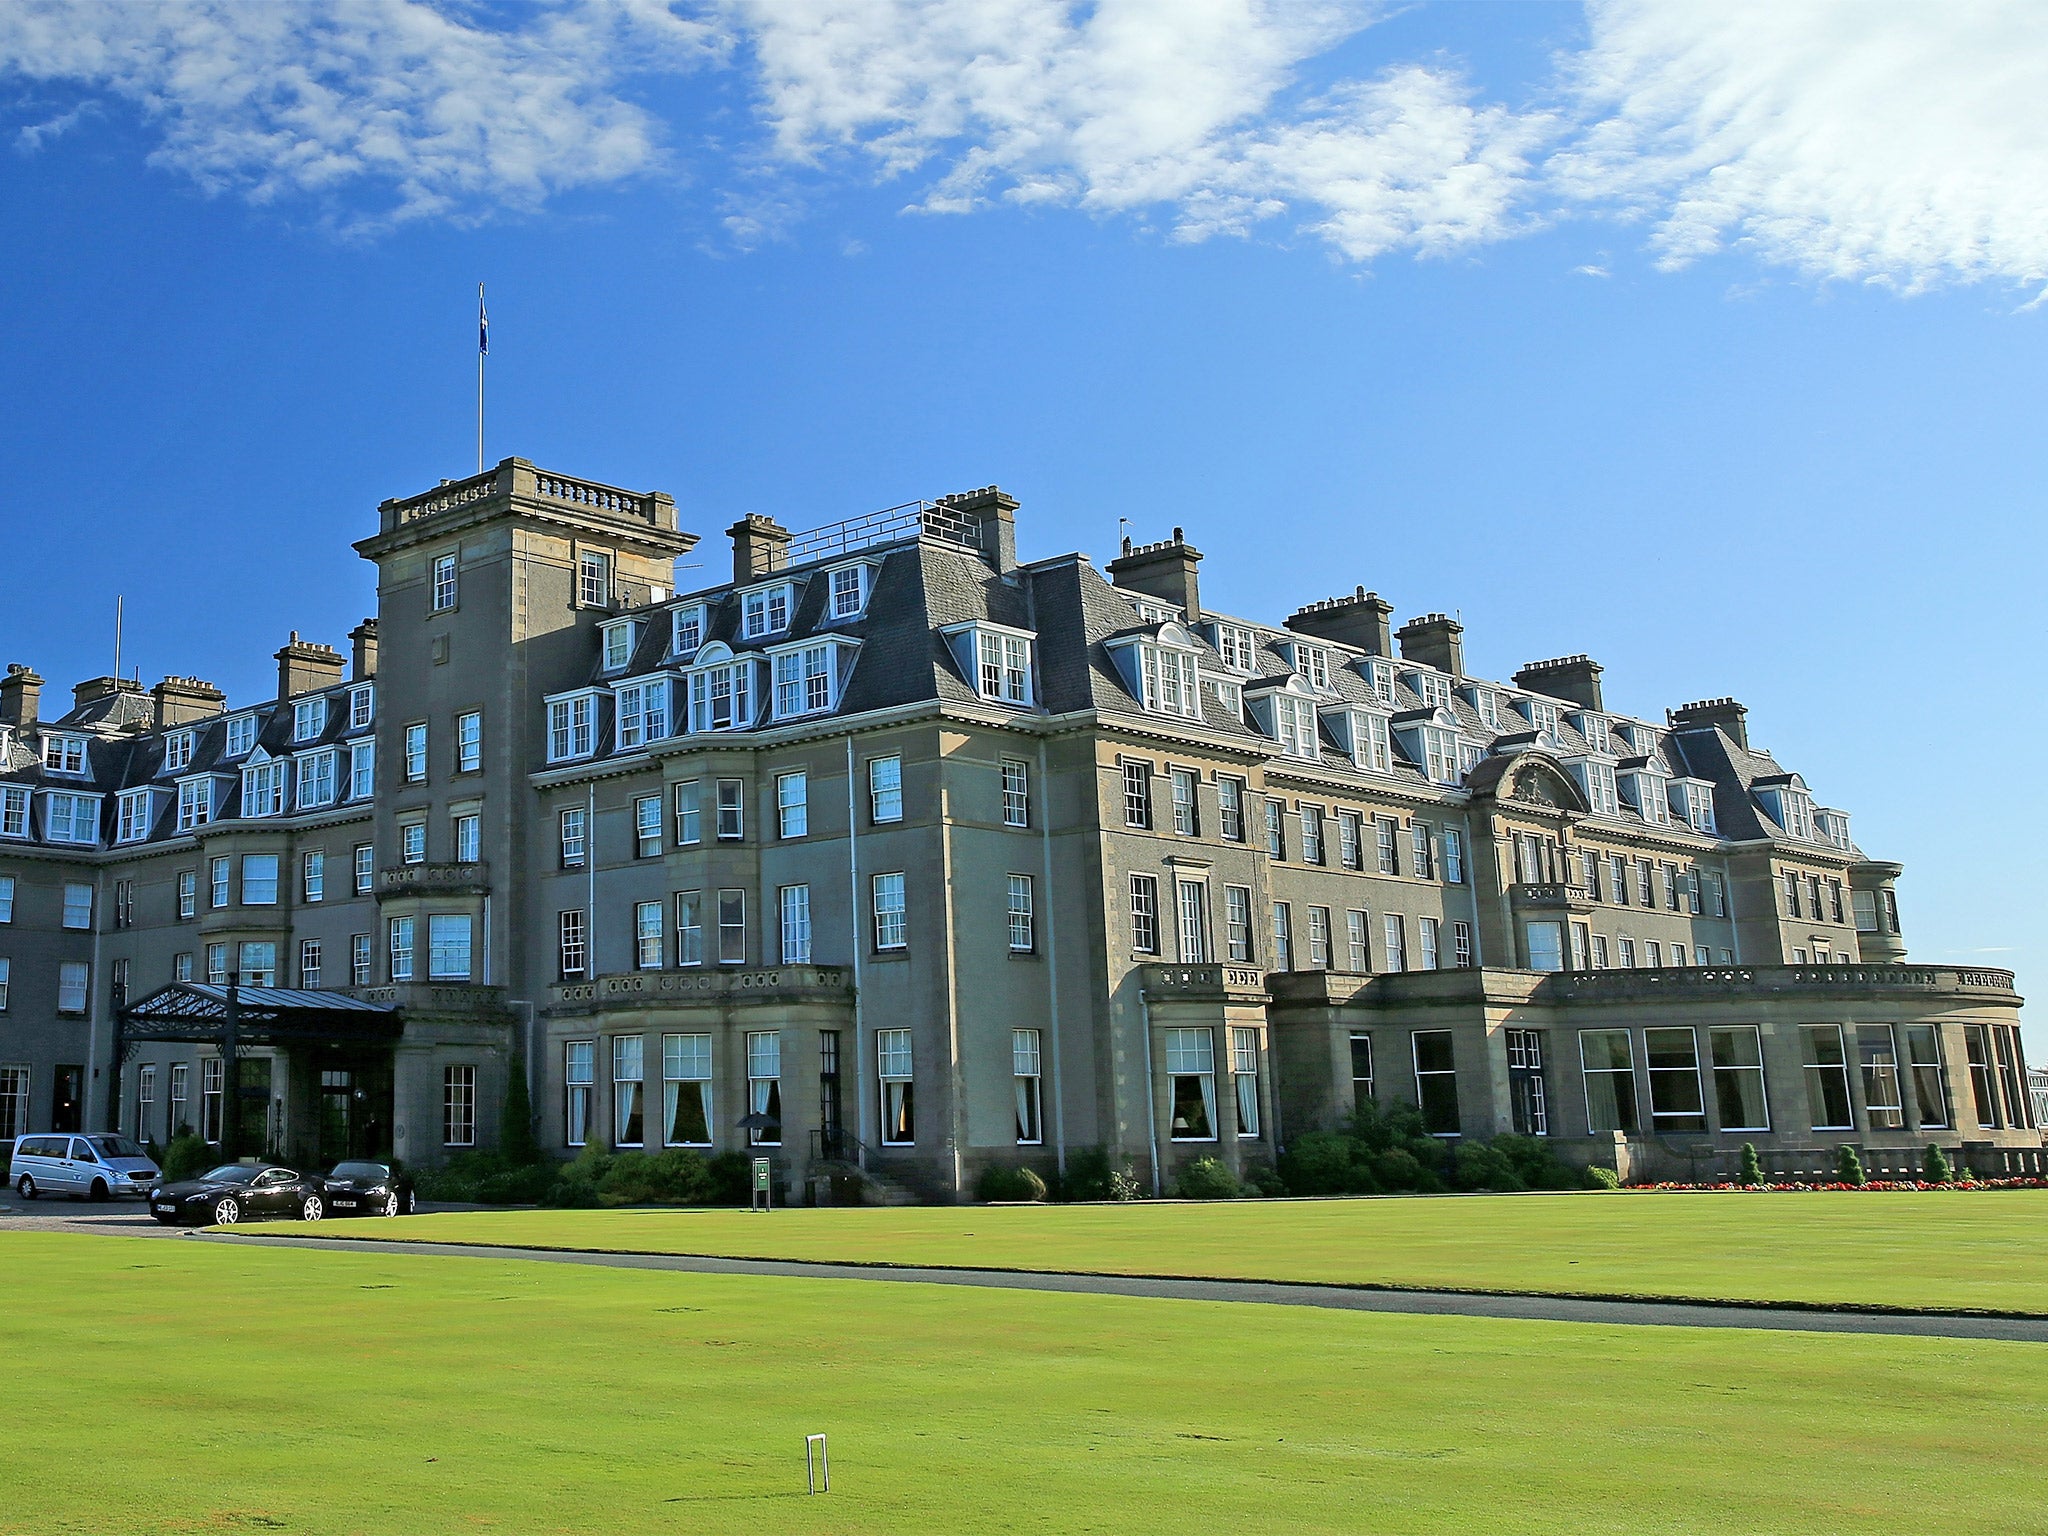 The famous hotel was the host venue for the 2014 Ryder Cup